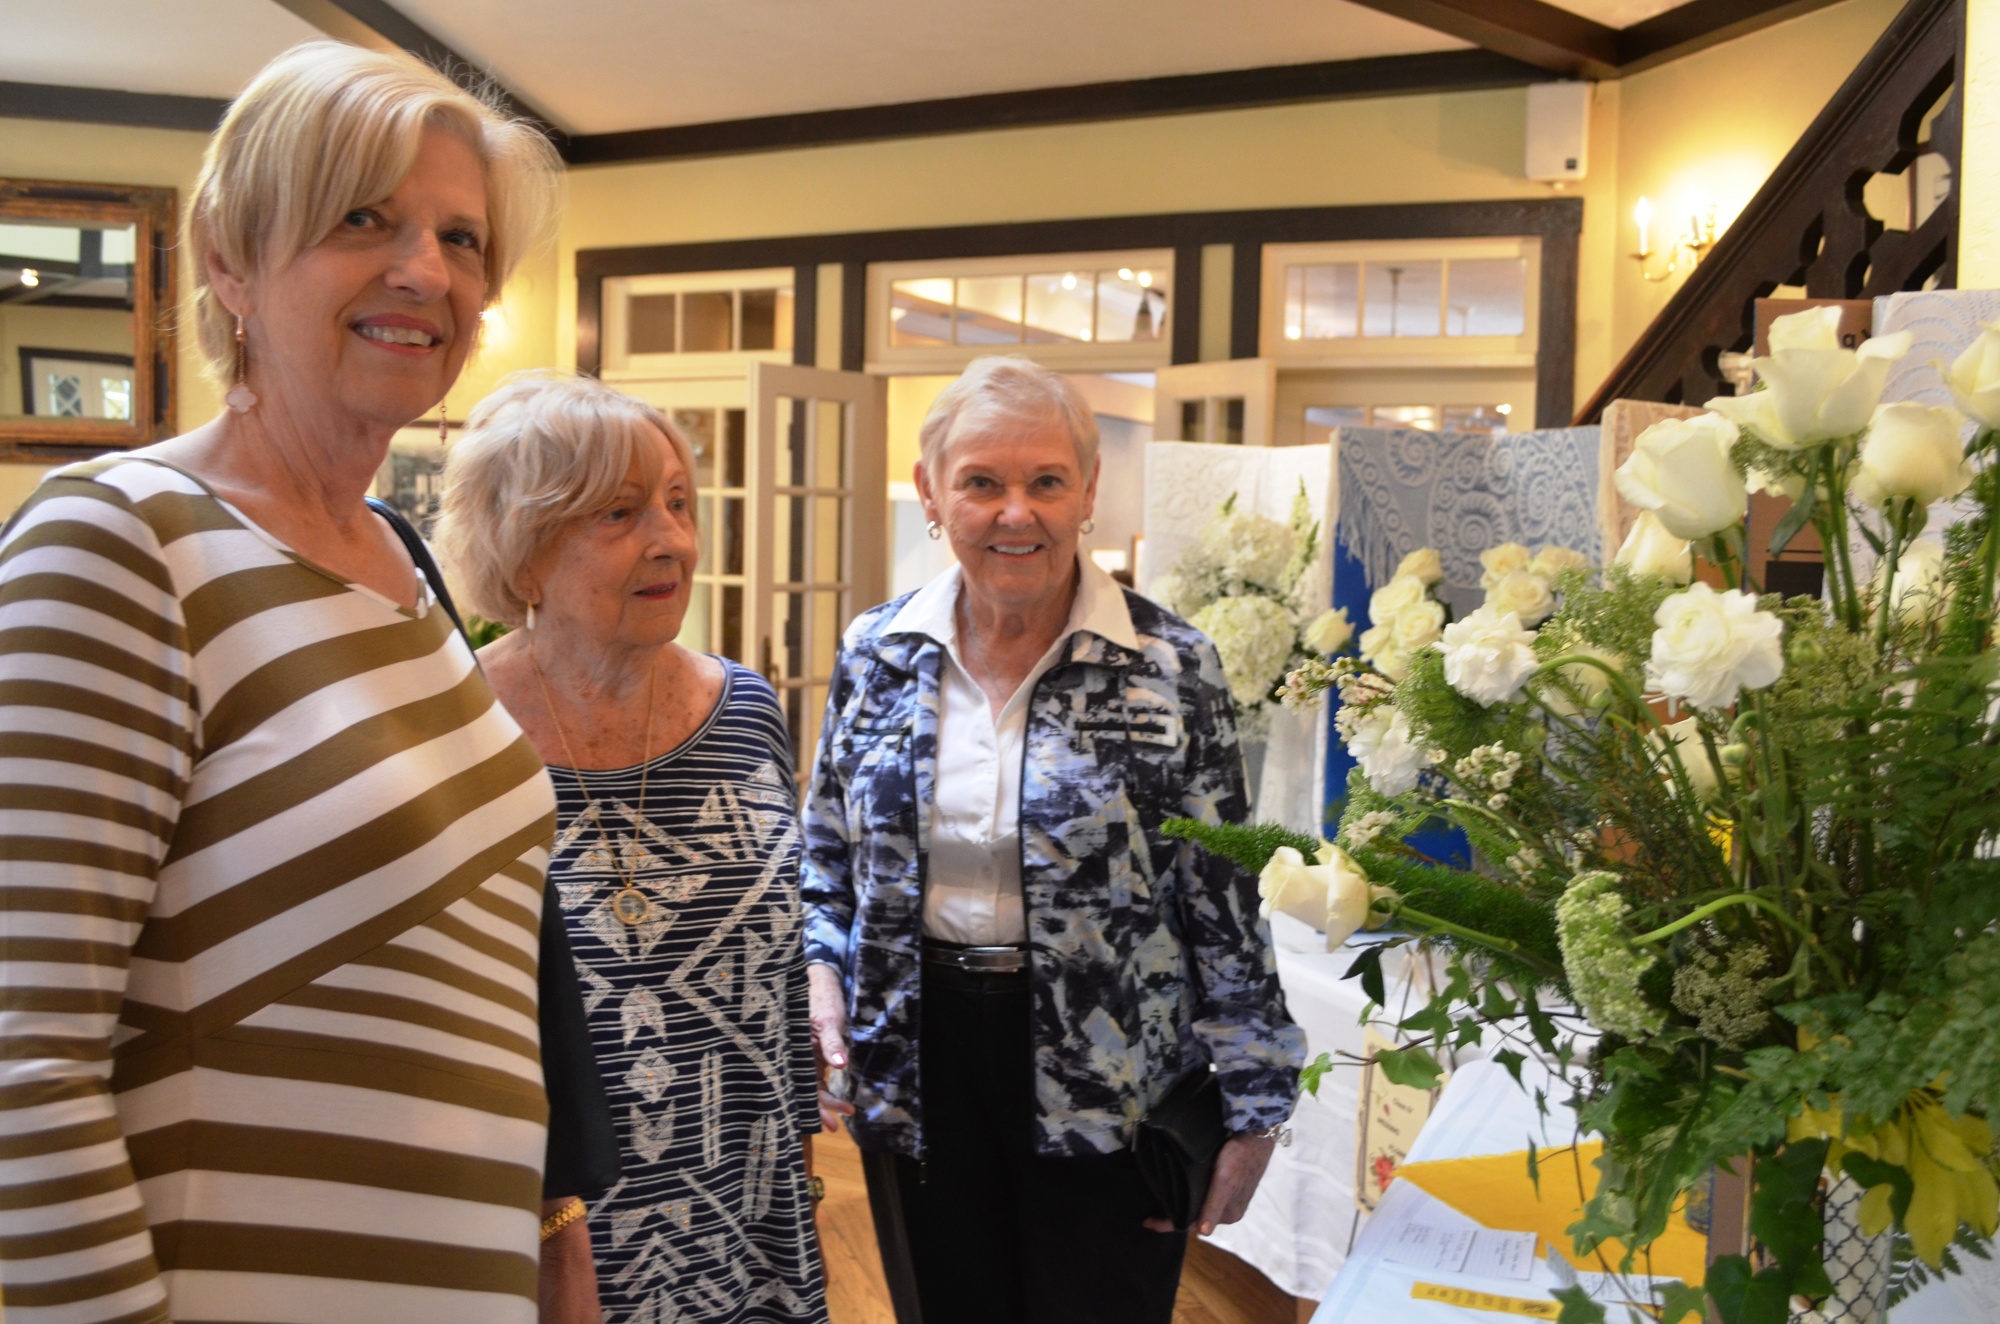 Bonnie Scarborough, Janet Gohn and Carol Smith talk about the flowers on display.